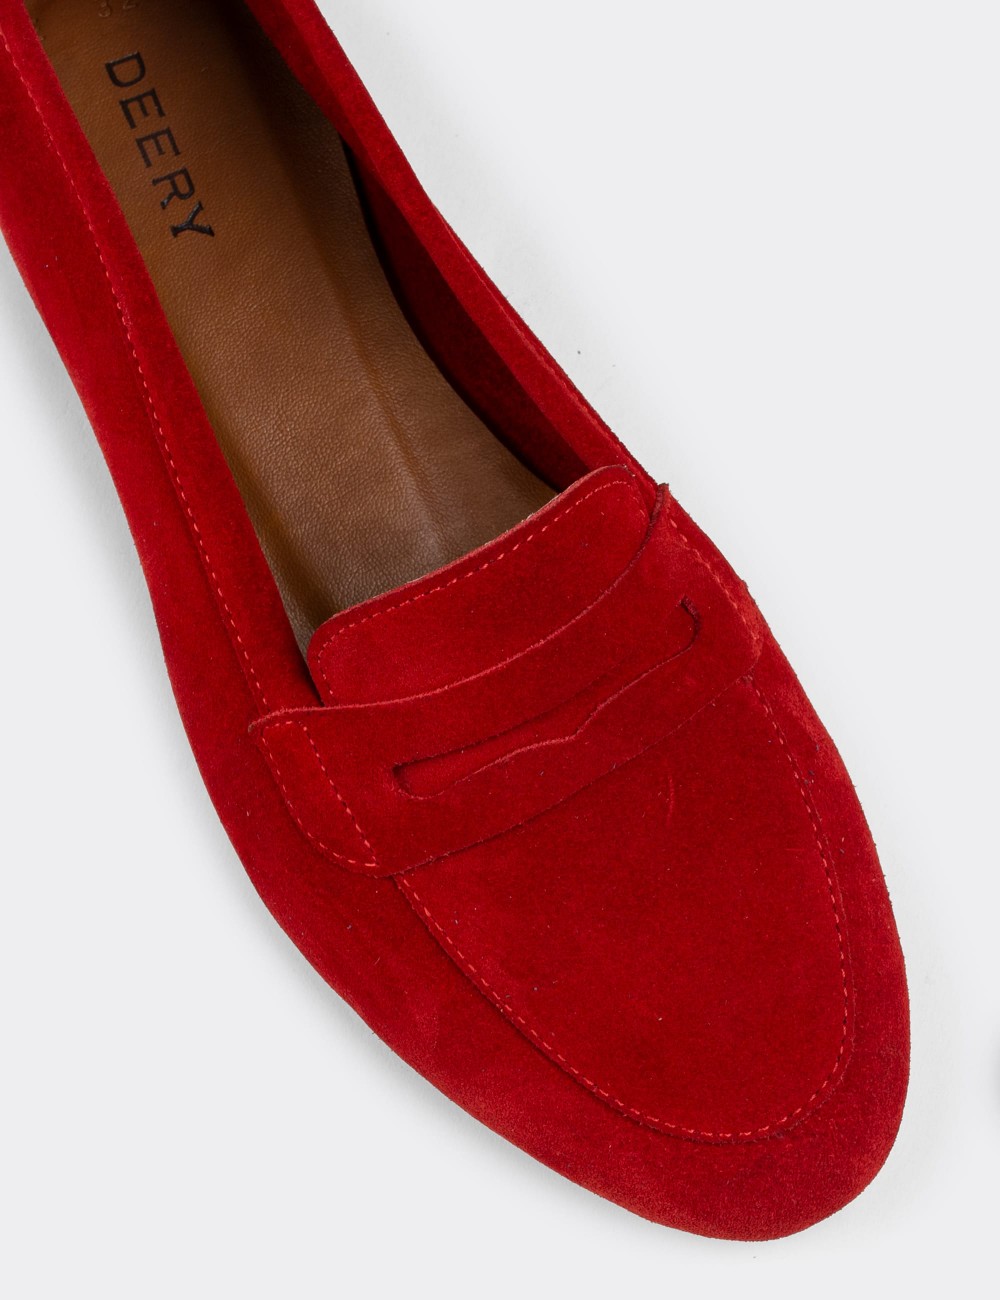 Red Suede Leather Loafers - E3202ZKRMC01